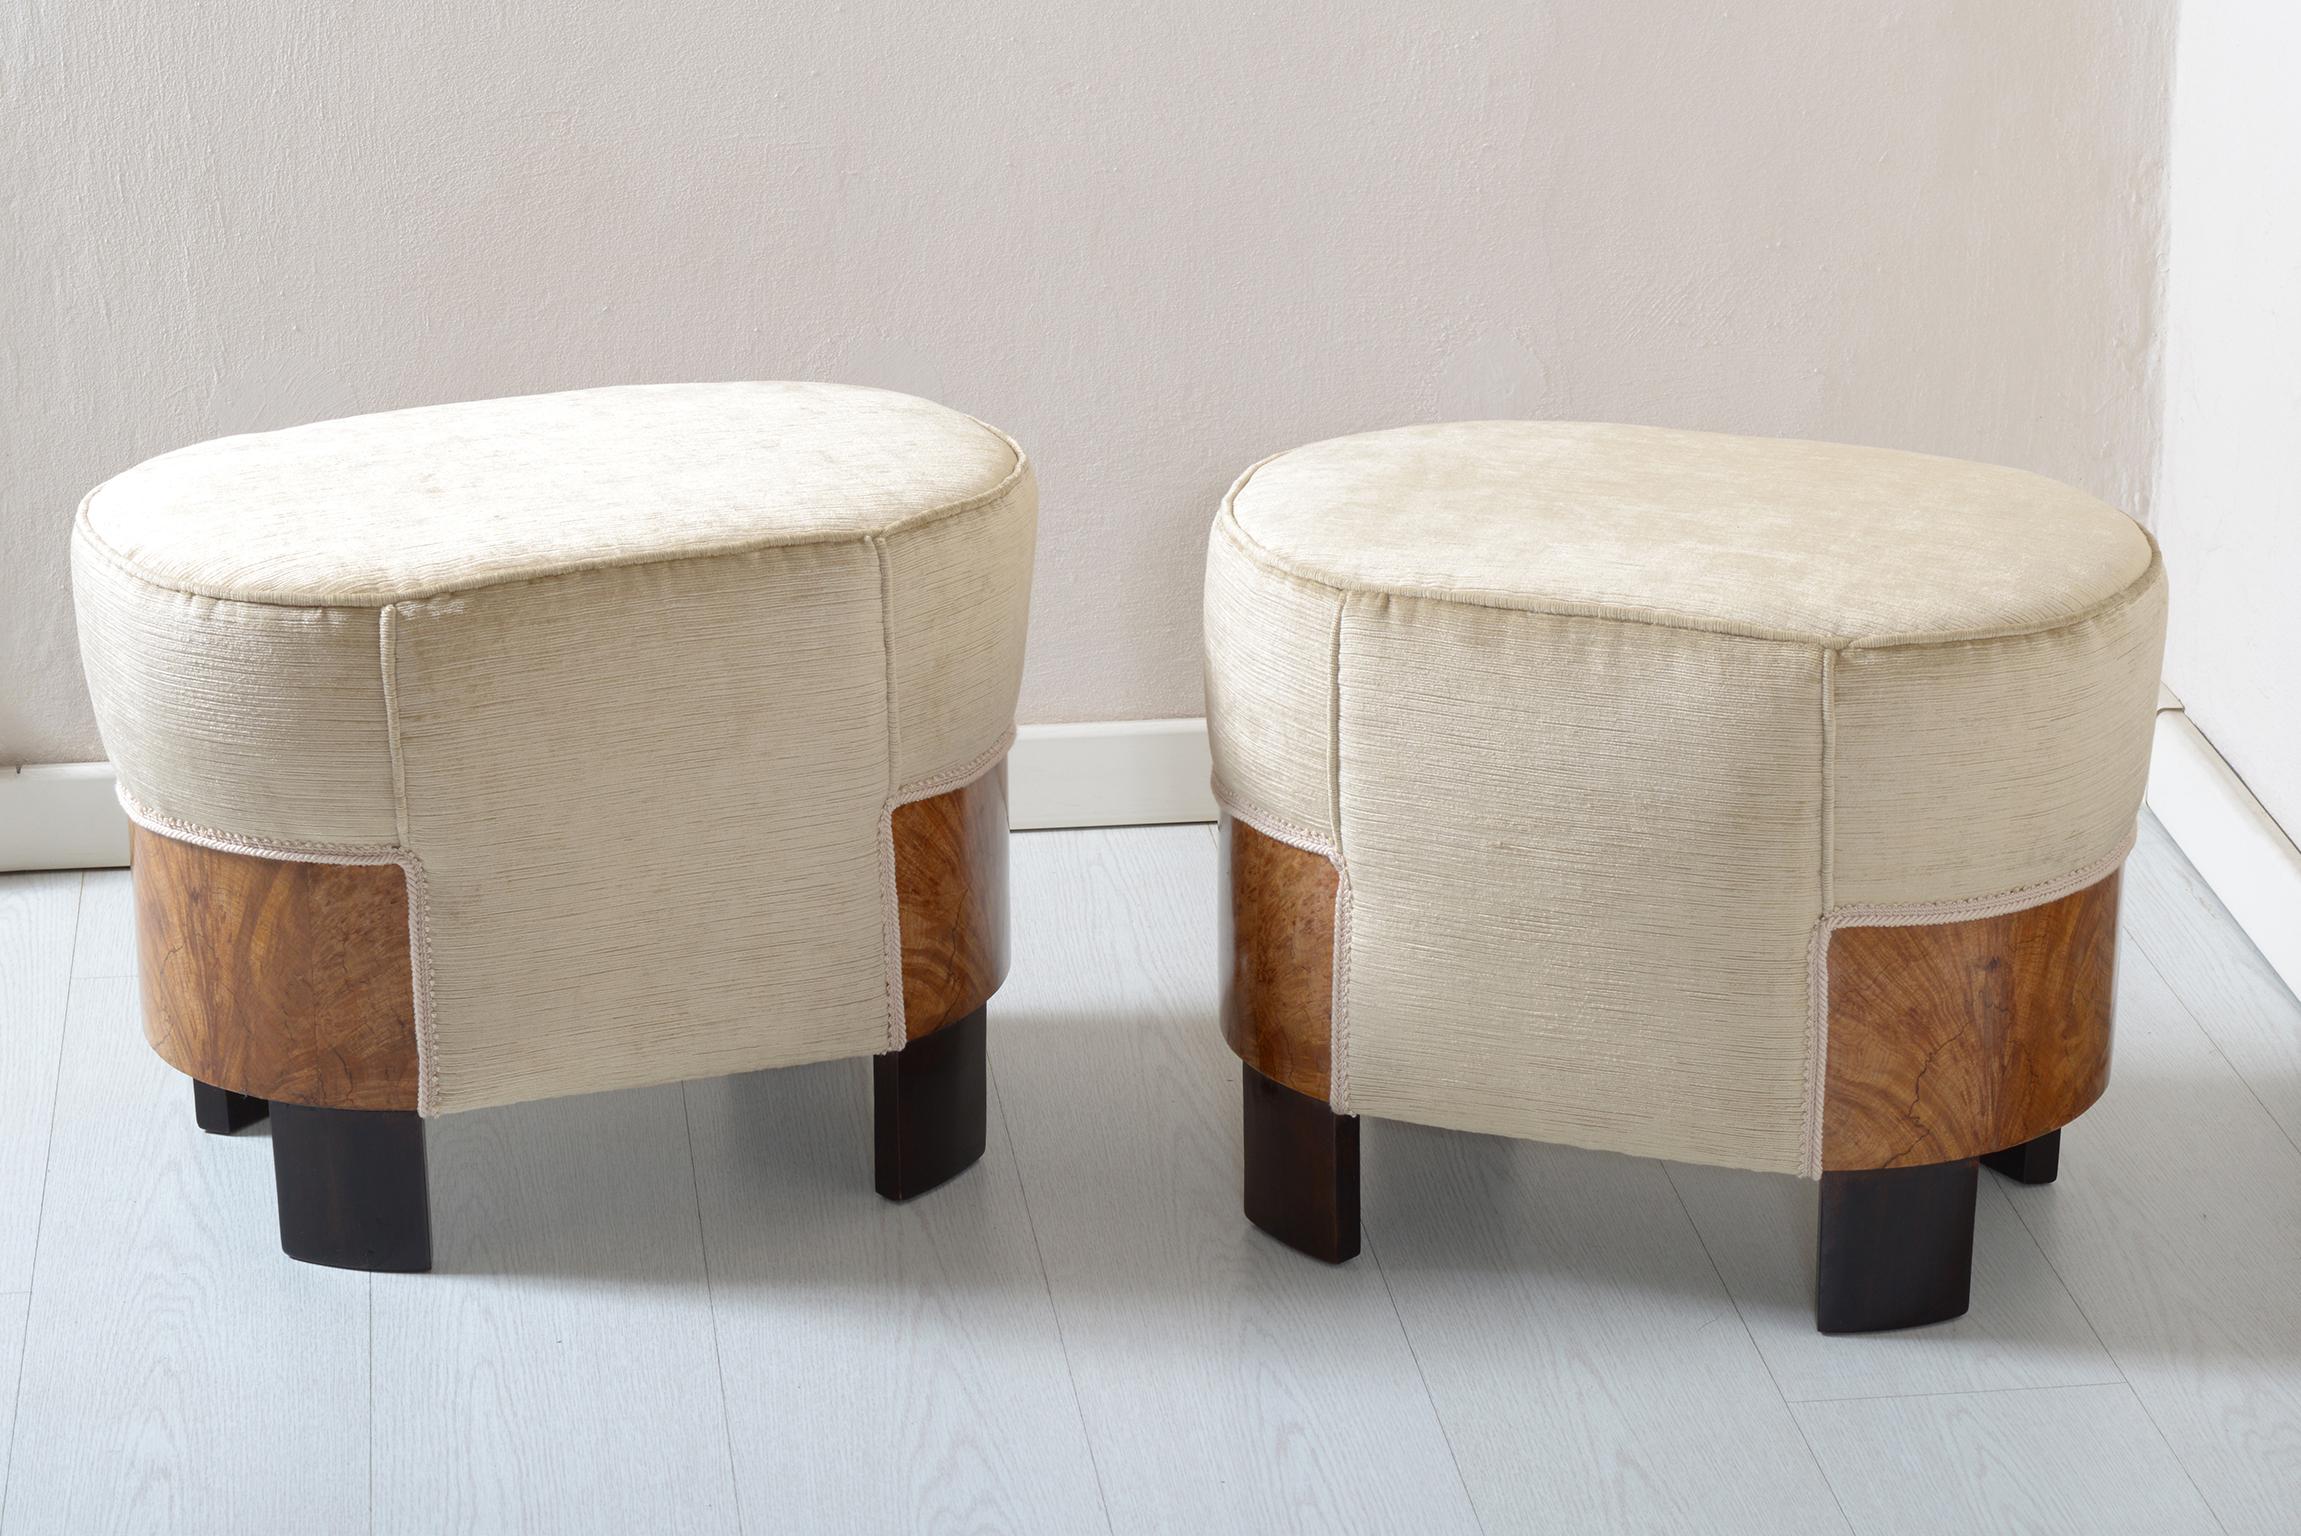 Pair of 1930 Art deco Italian oval stools with beautiful blond walnut burl, convex feet in ebonized walnut (black lacquered), covered with new beige cotton velvet fabric.
Manufacture Meroni and Fossati Italia, 1930s.
  